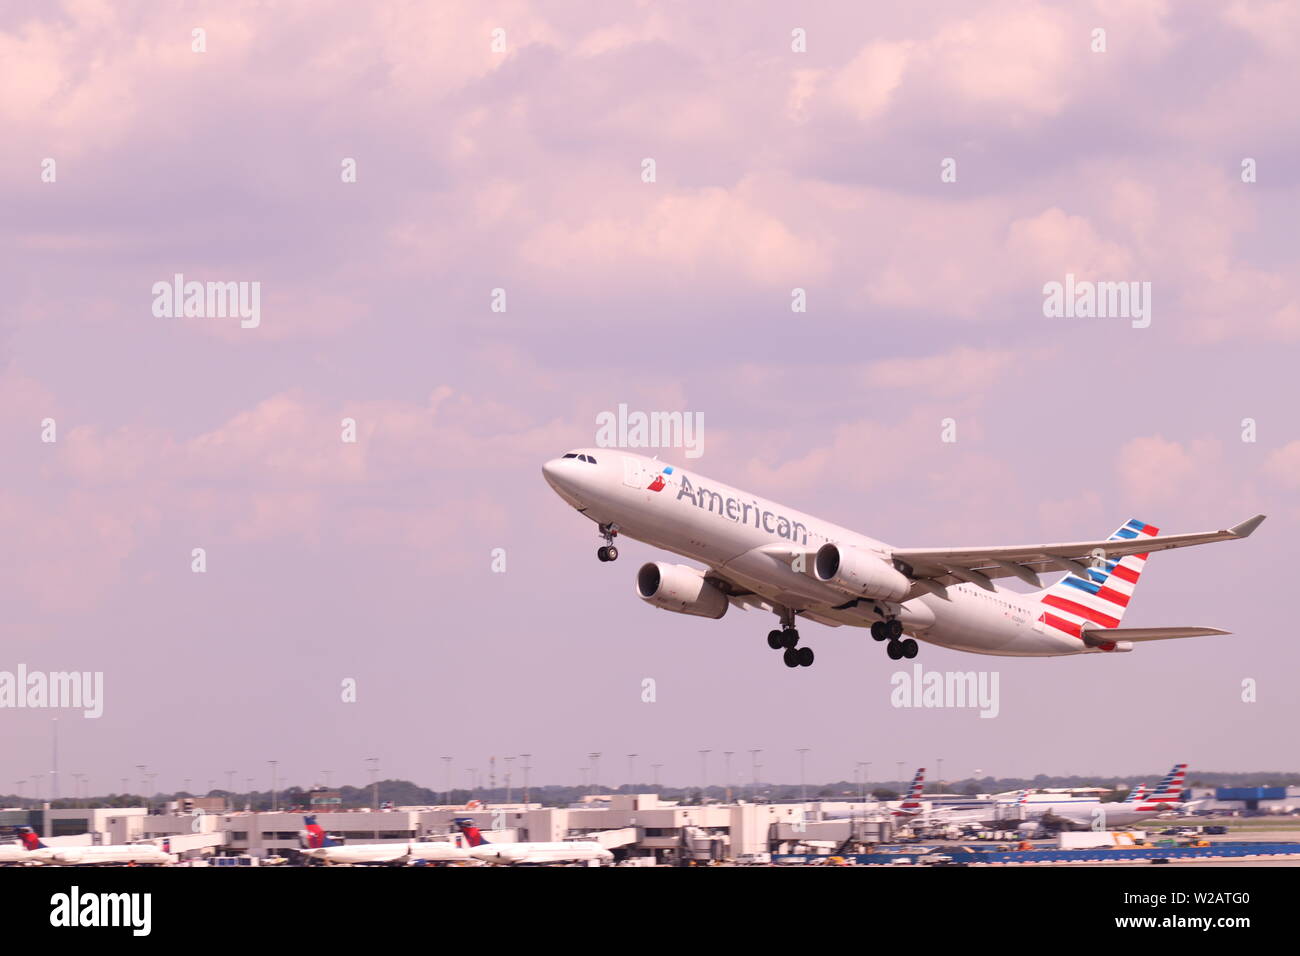 American Airlines planes taking off at CLT, Charlotte Douglas International Airport, Charlotte, NC Stock Photo